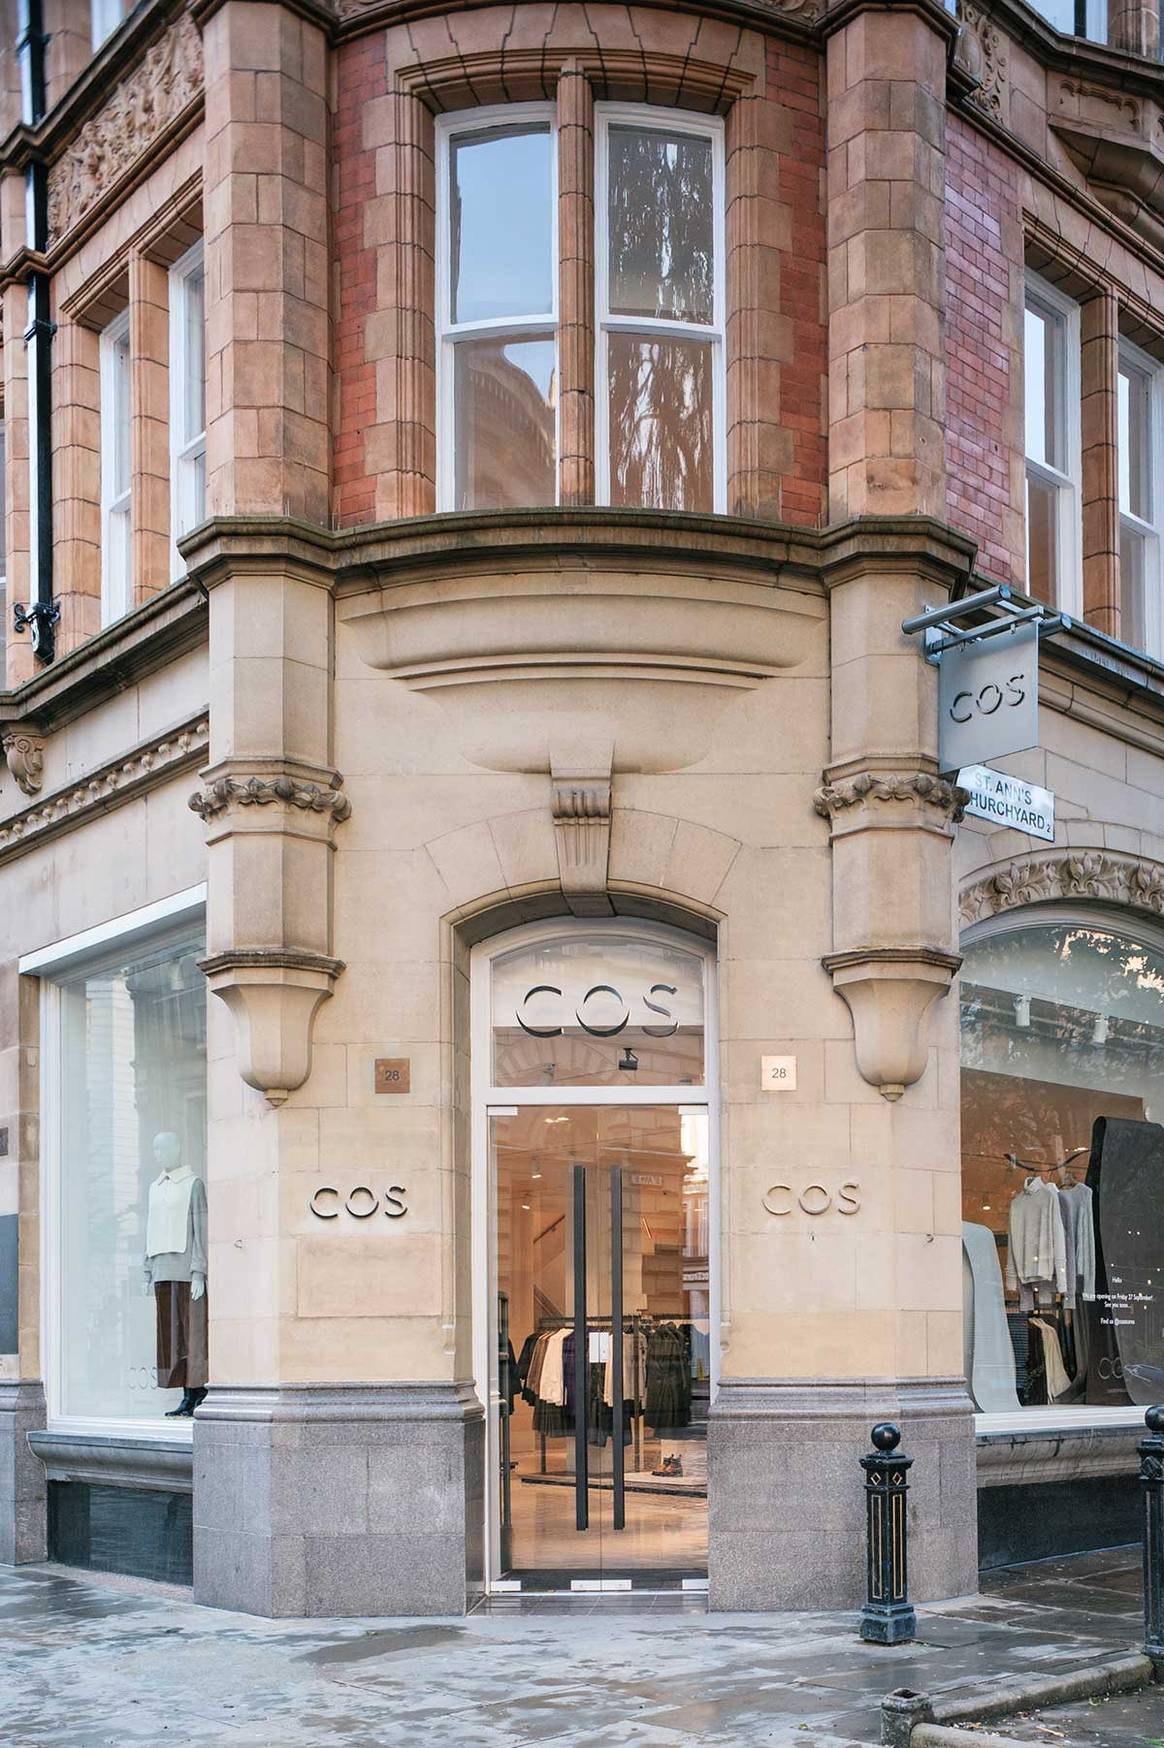 Cos opens first store in Manchester